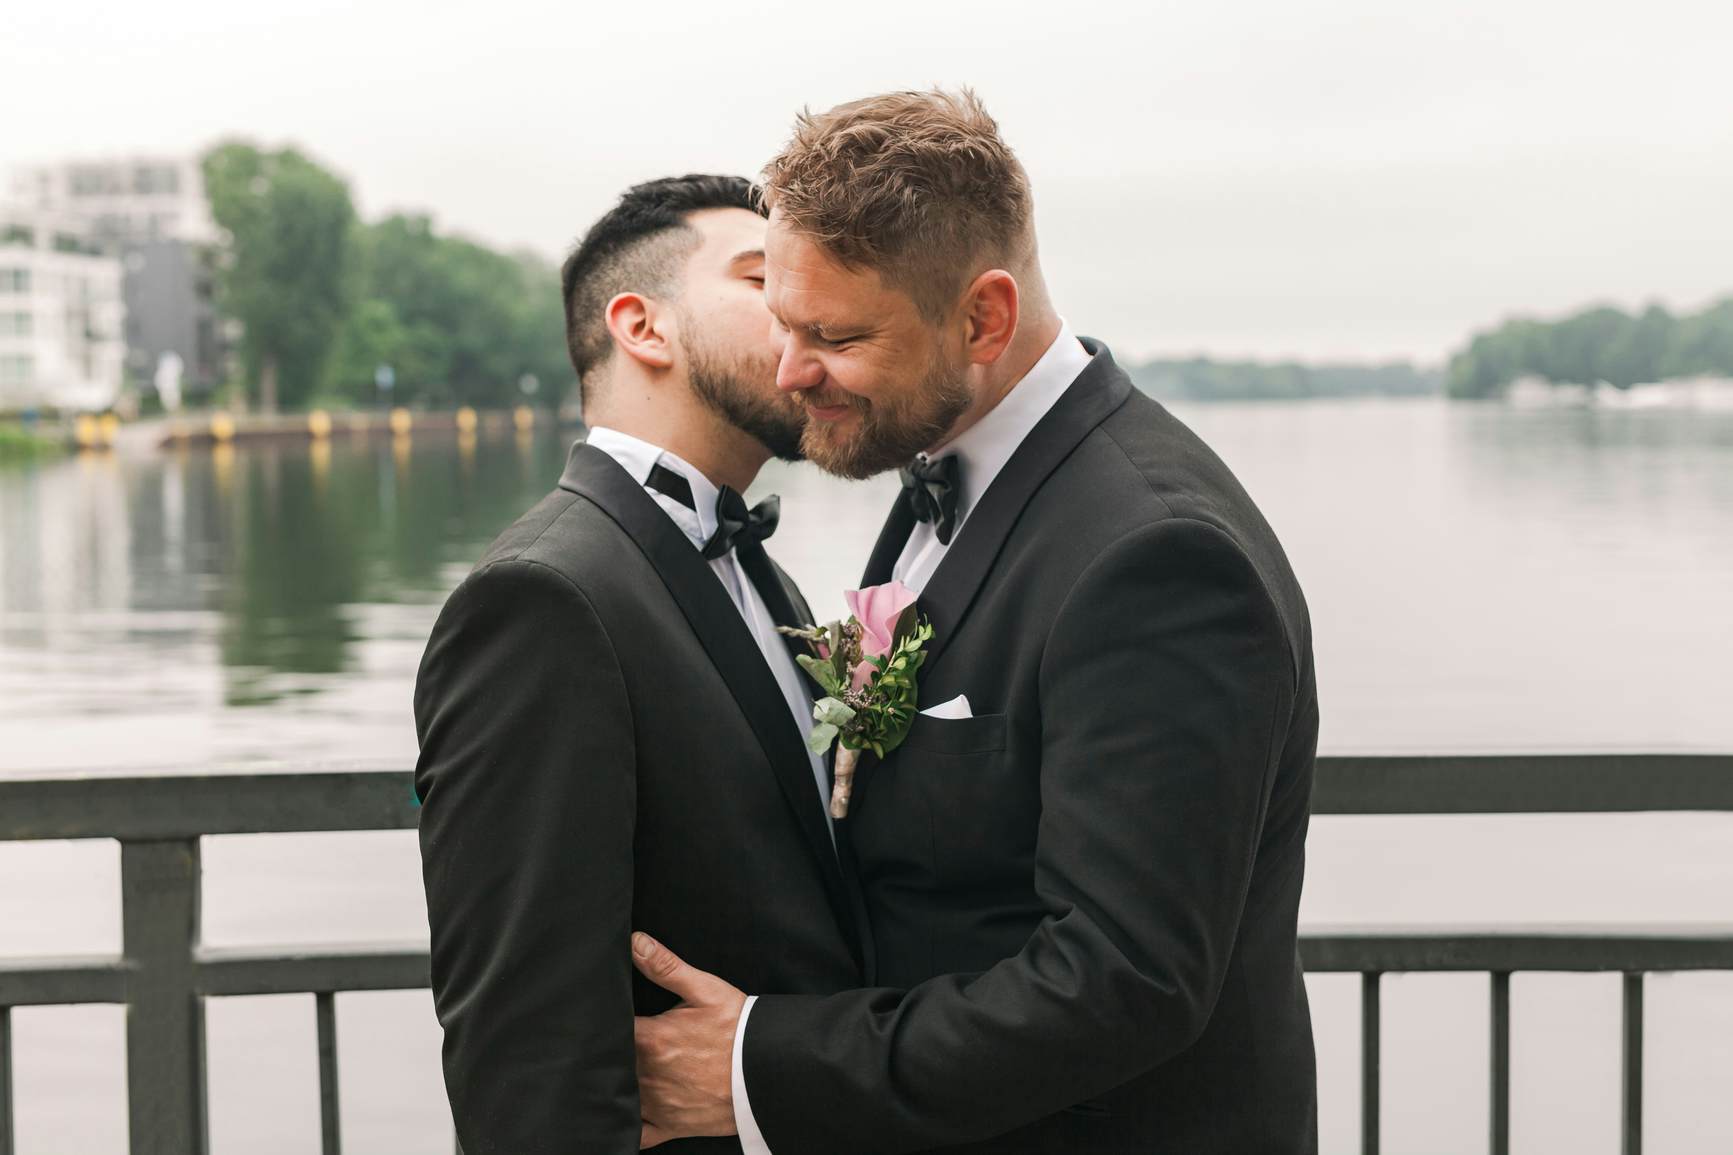 Planning a same sex marriage in Switzerland - all you need to know pic